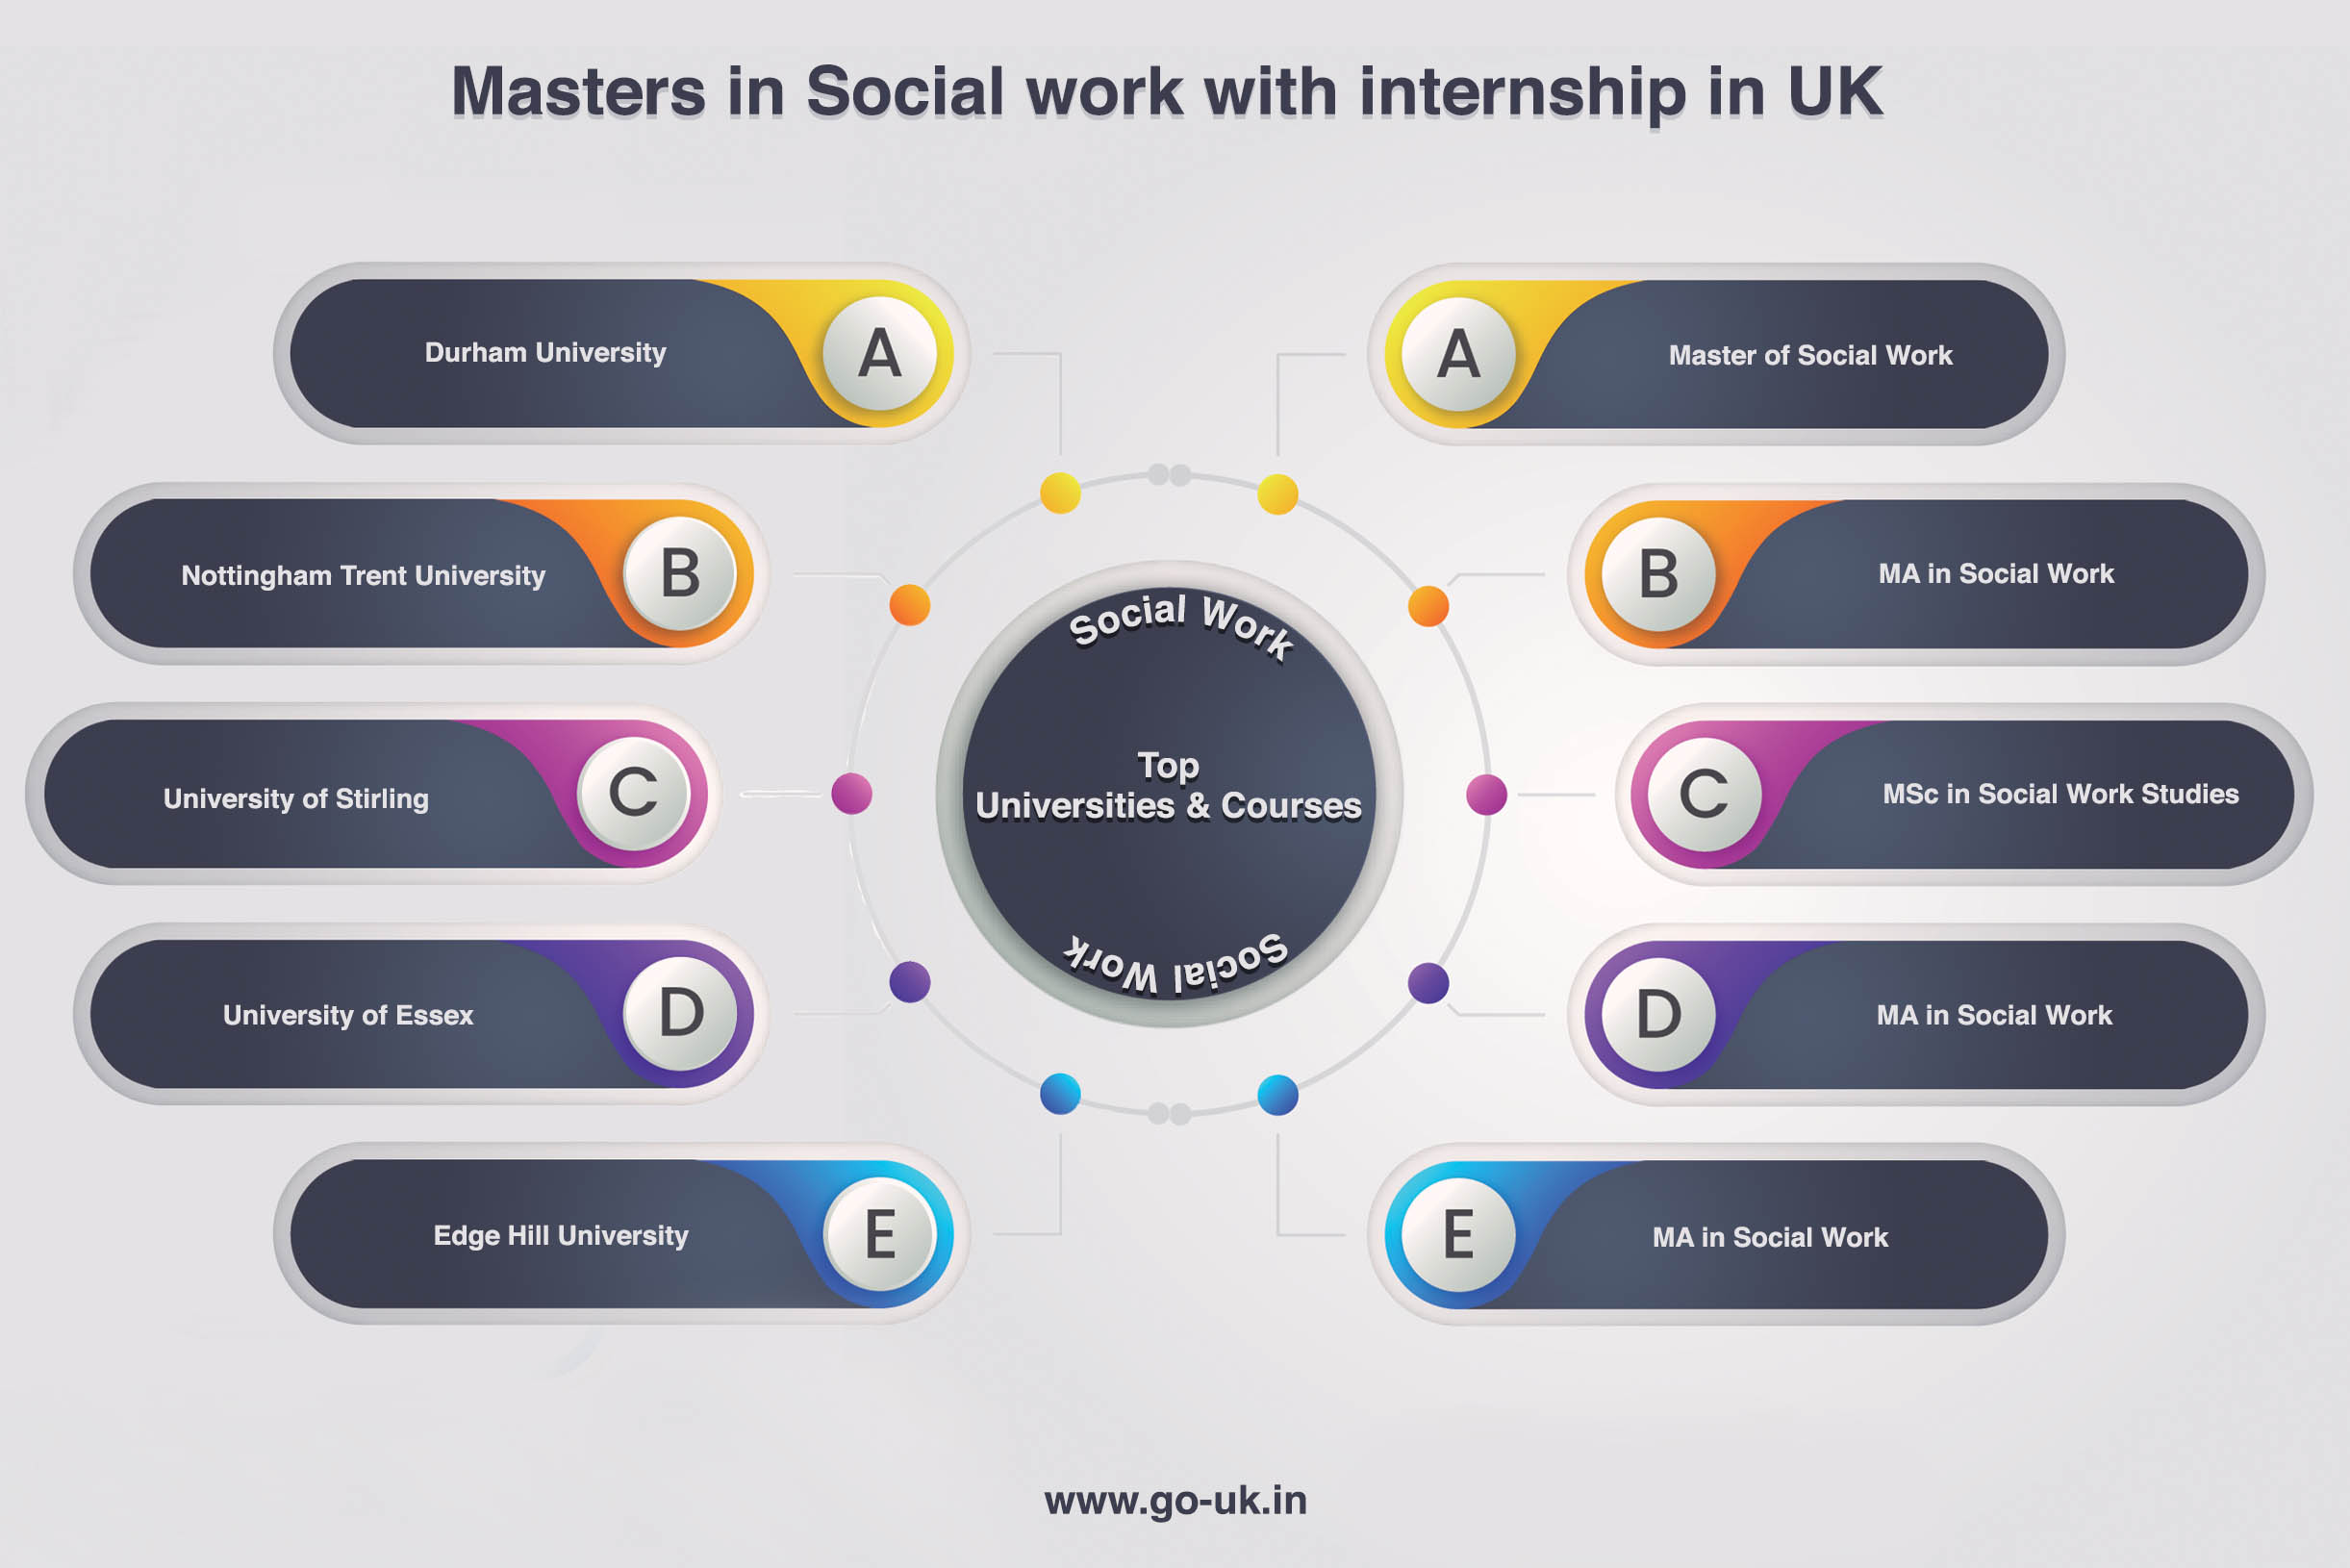 Masters in Social Work with Internship in UK